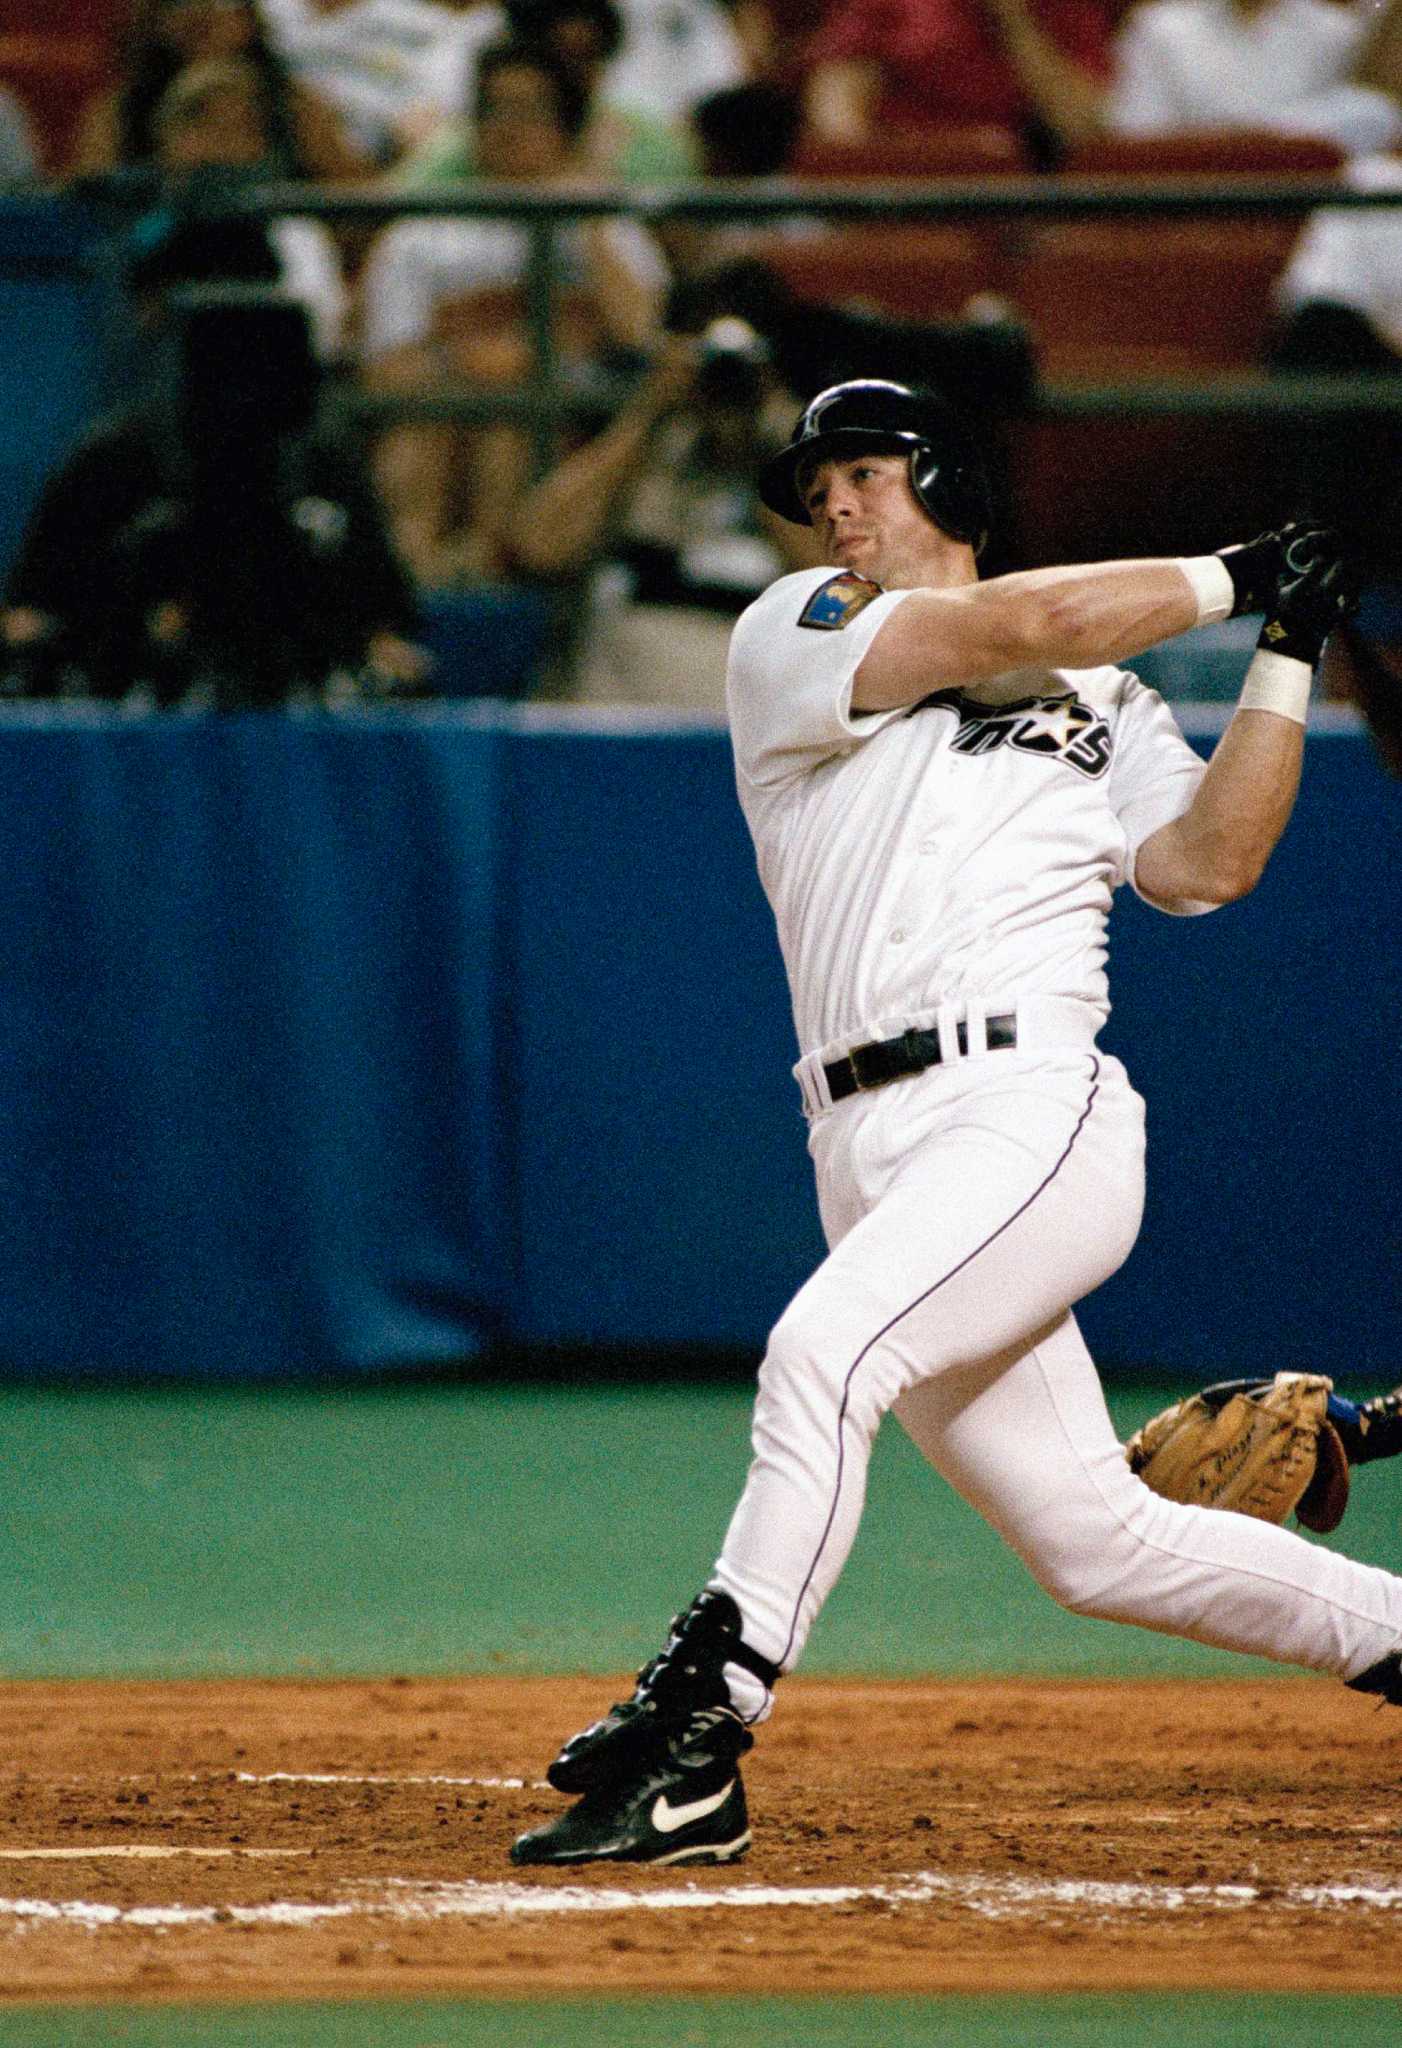 By every measure, Bagwell was a beacon of greatness in 1994